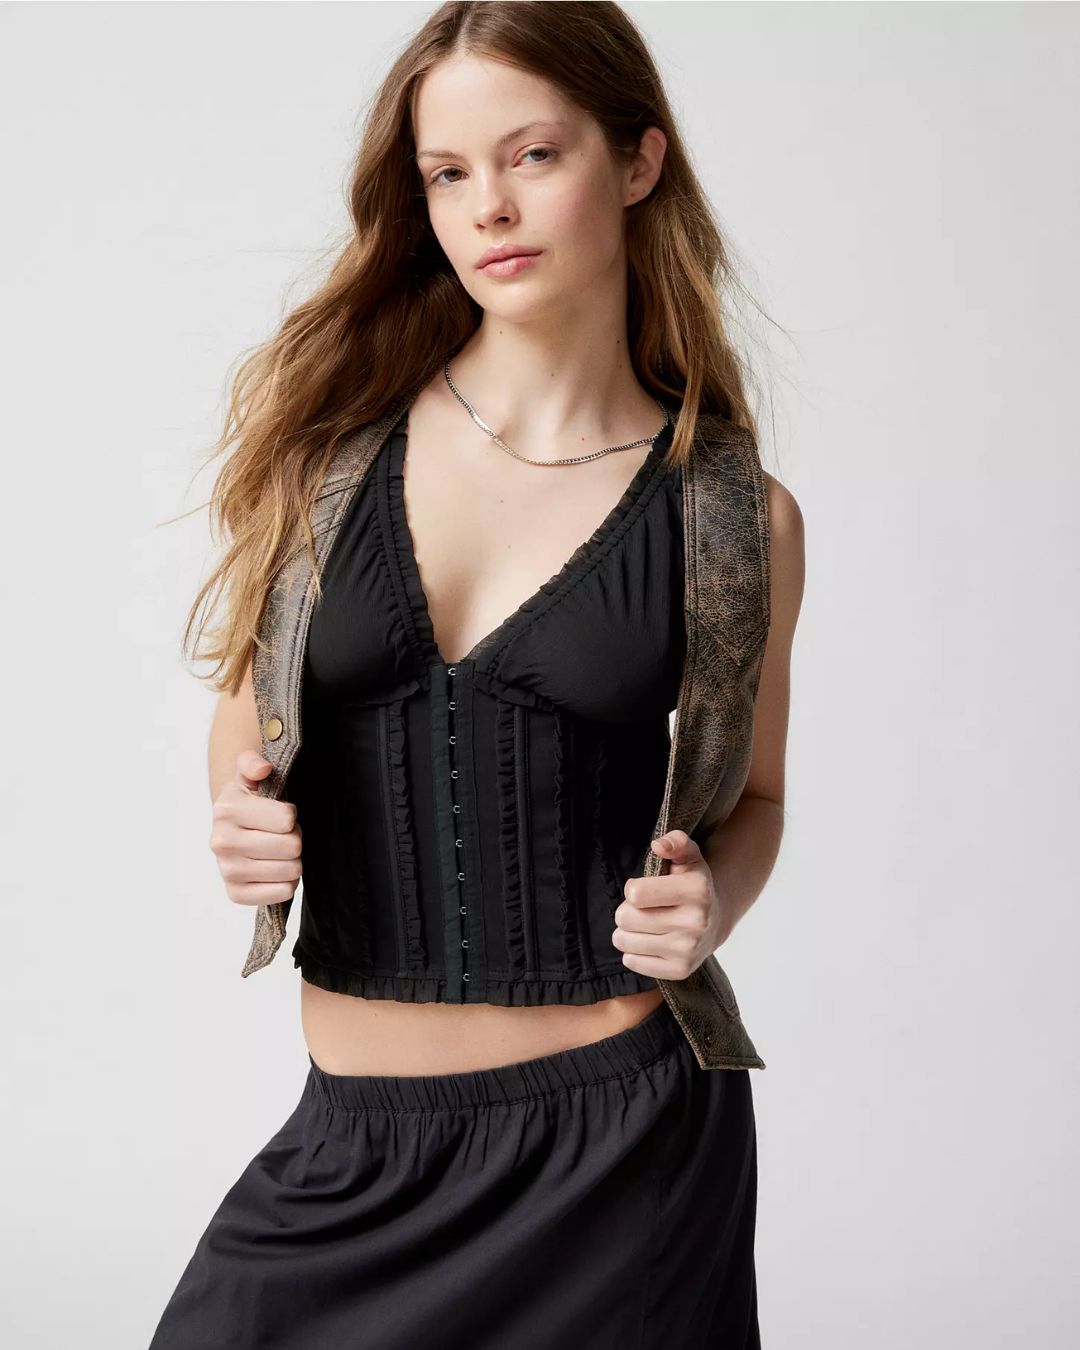 ruffled-corset-top-black,RUFFLED CORSET TOP,Color: Black
Fabric: Cotton, Polyester
Fit: Slim Fit 
Length: Regular
Neck: V-Neck 
Sleeves: Sleeveless
Closure: Hook & Eye
Print: Solid
Details: Ruffle Detailing,topwear,tops,casual,soft girl,stretchable, woven,cotton, polyester,black,solid,ruffled,slim fit,corset,regular,v-neck,sleeveless